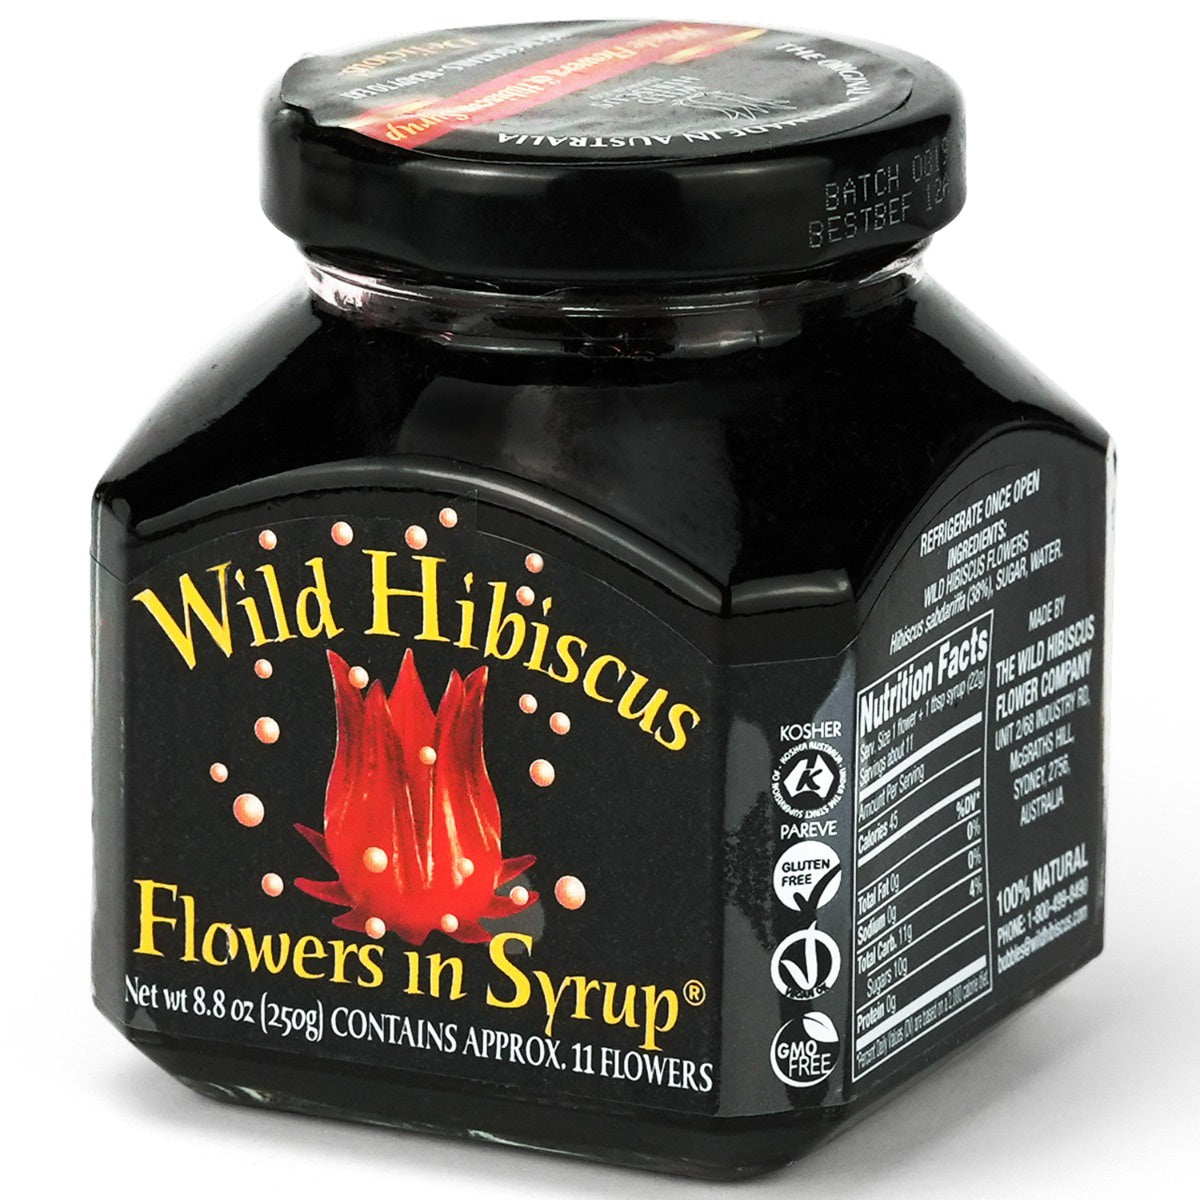 Wild Hibiscus Flowers in Syrup 8.8oz